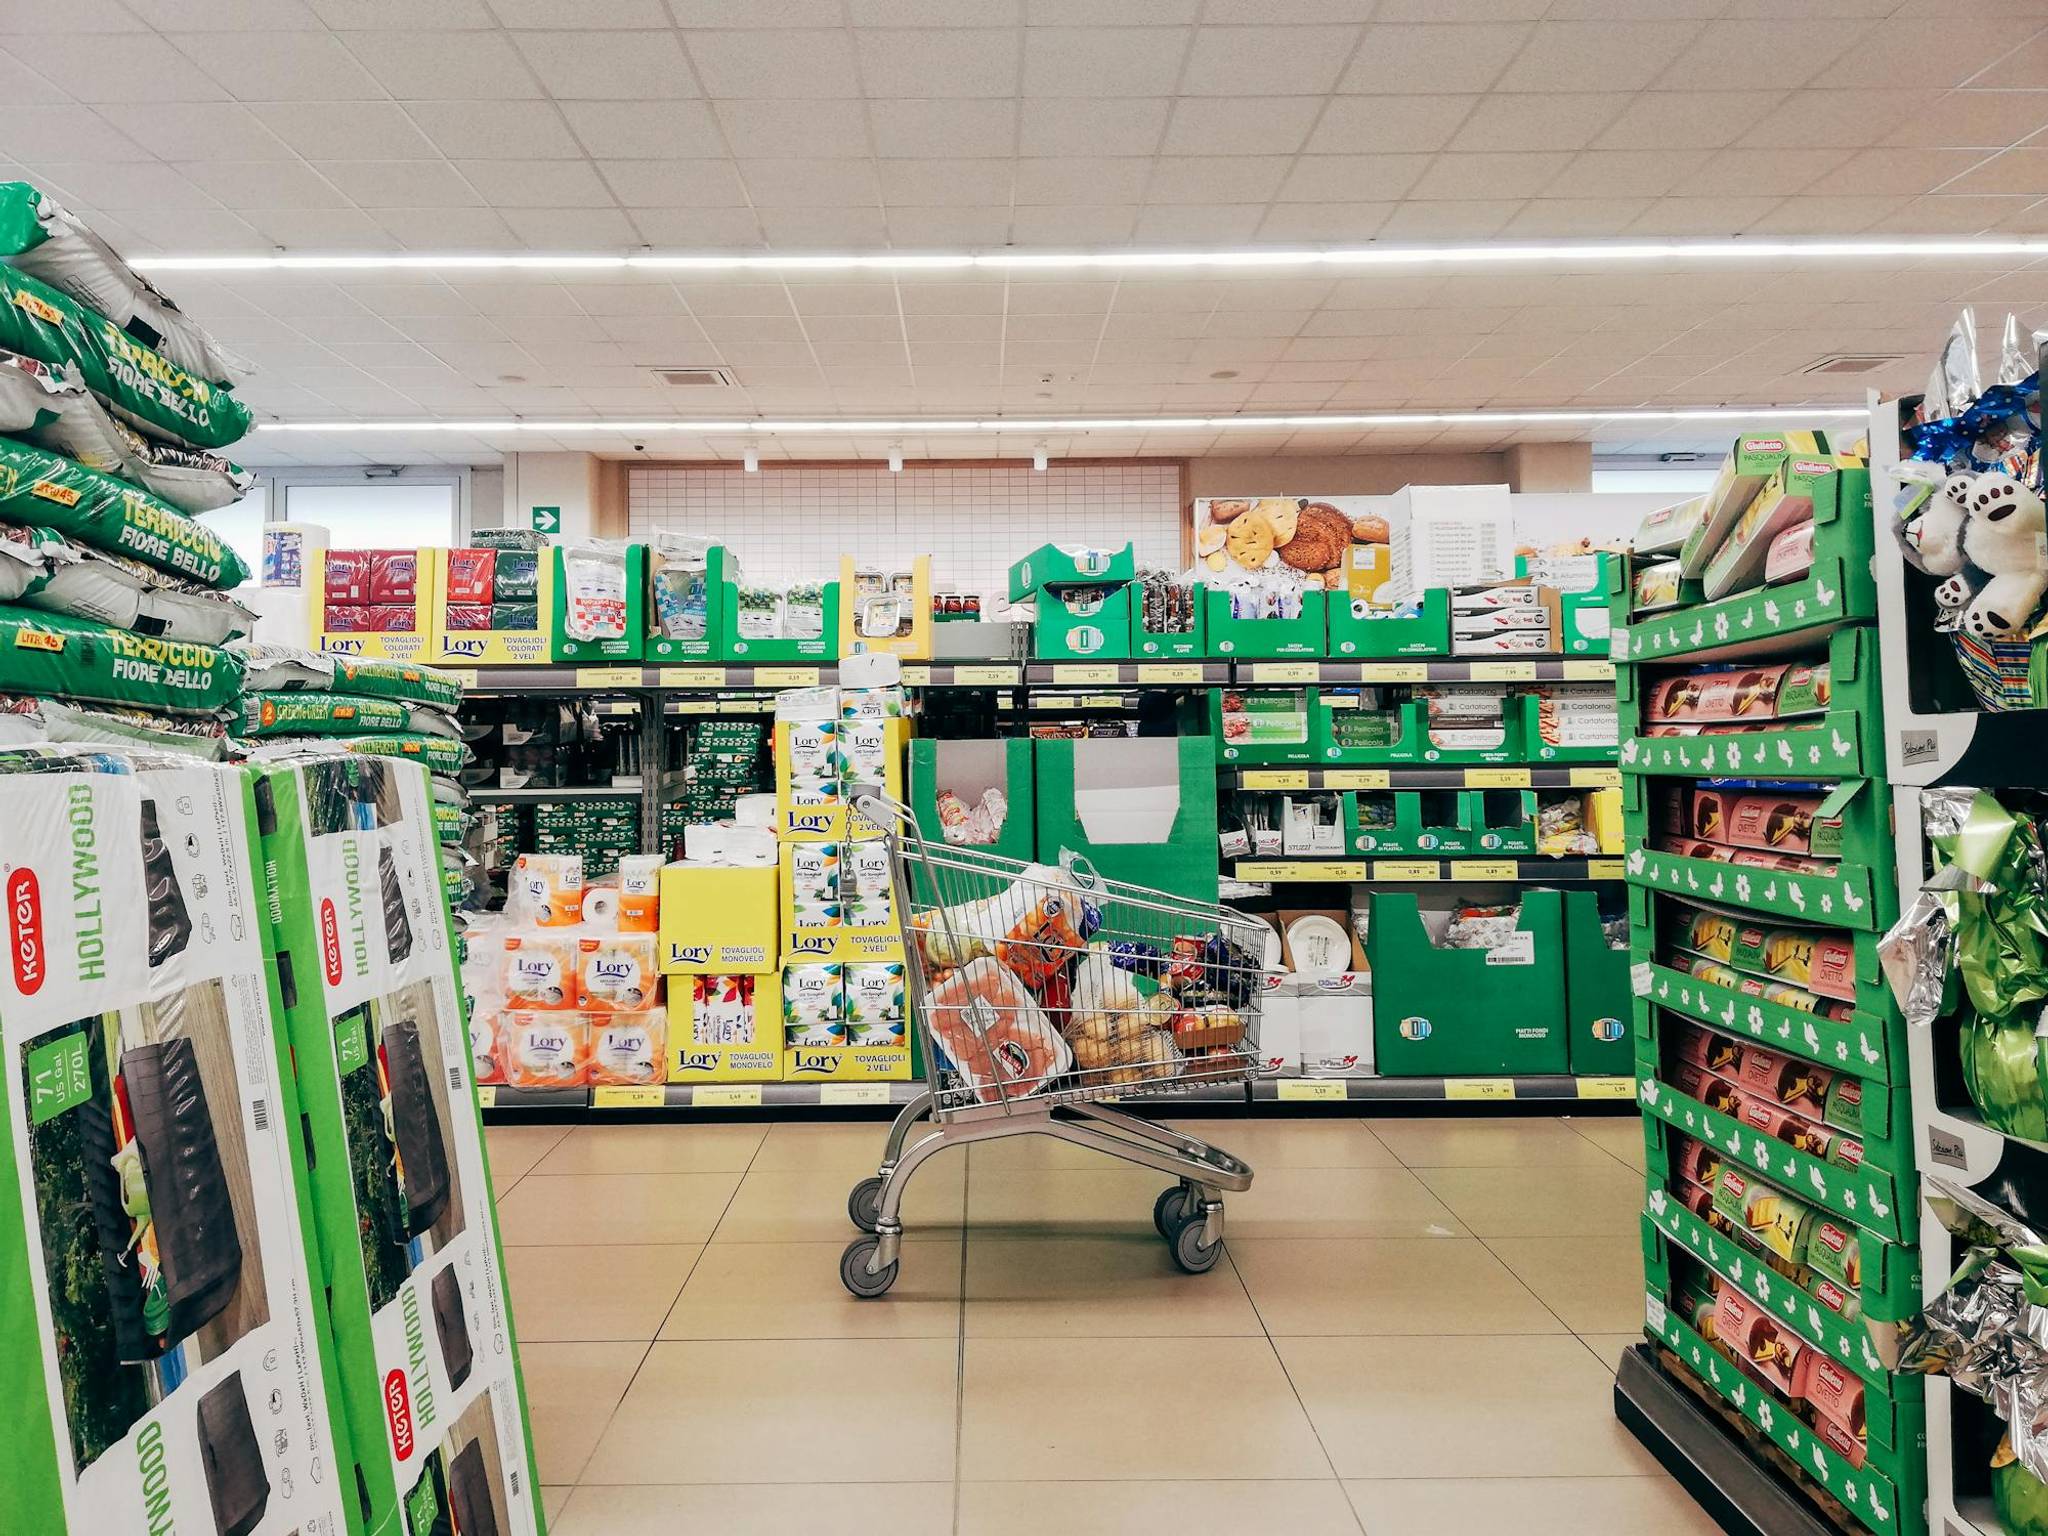 The groceries shrunk! The science of shrinkflation aversion